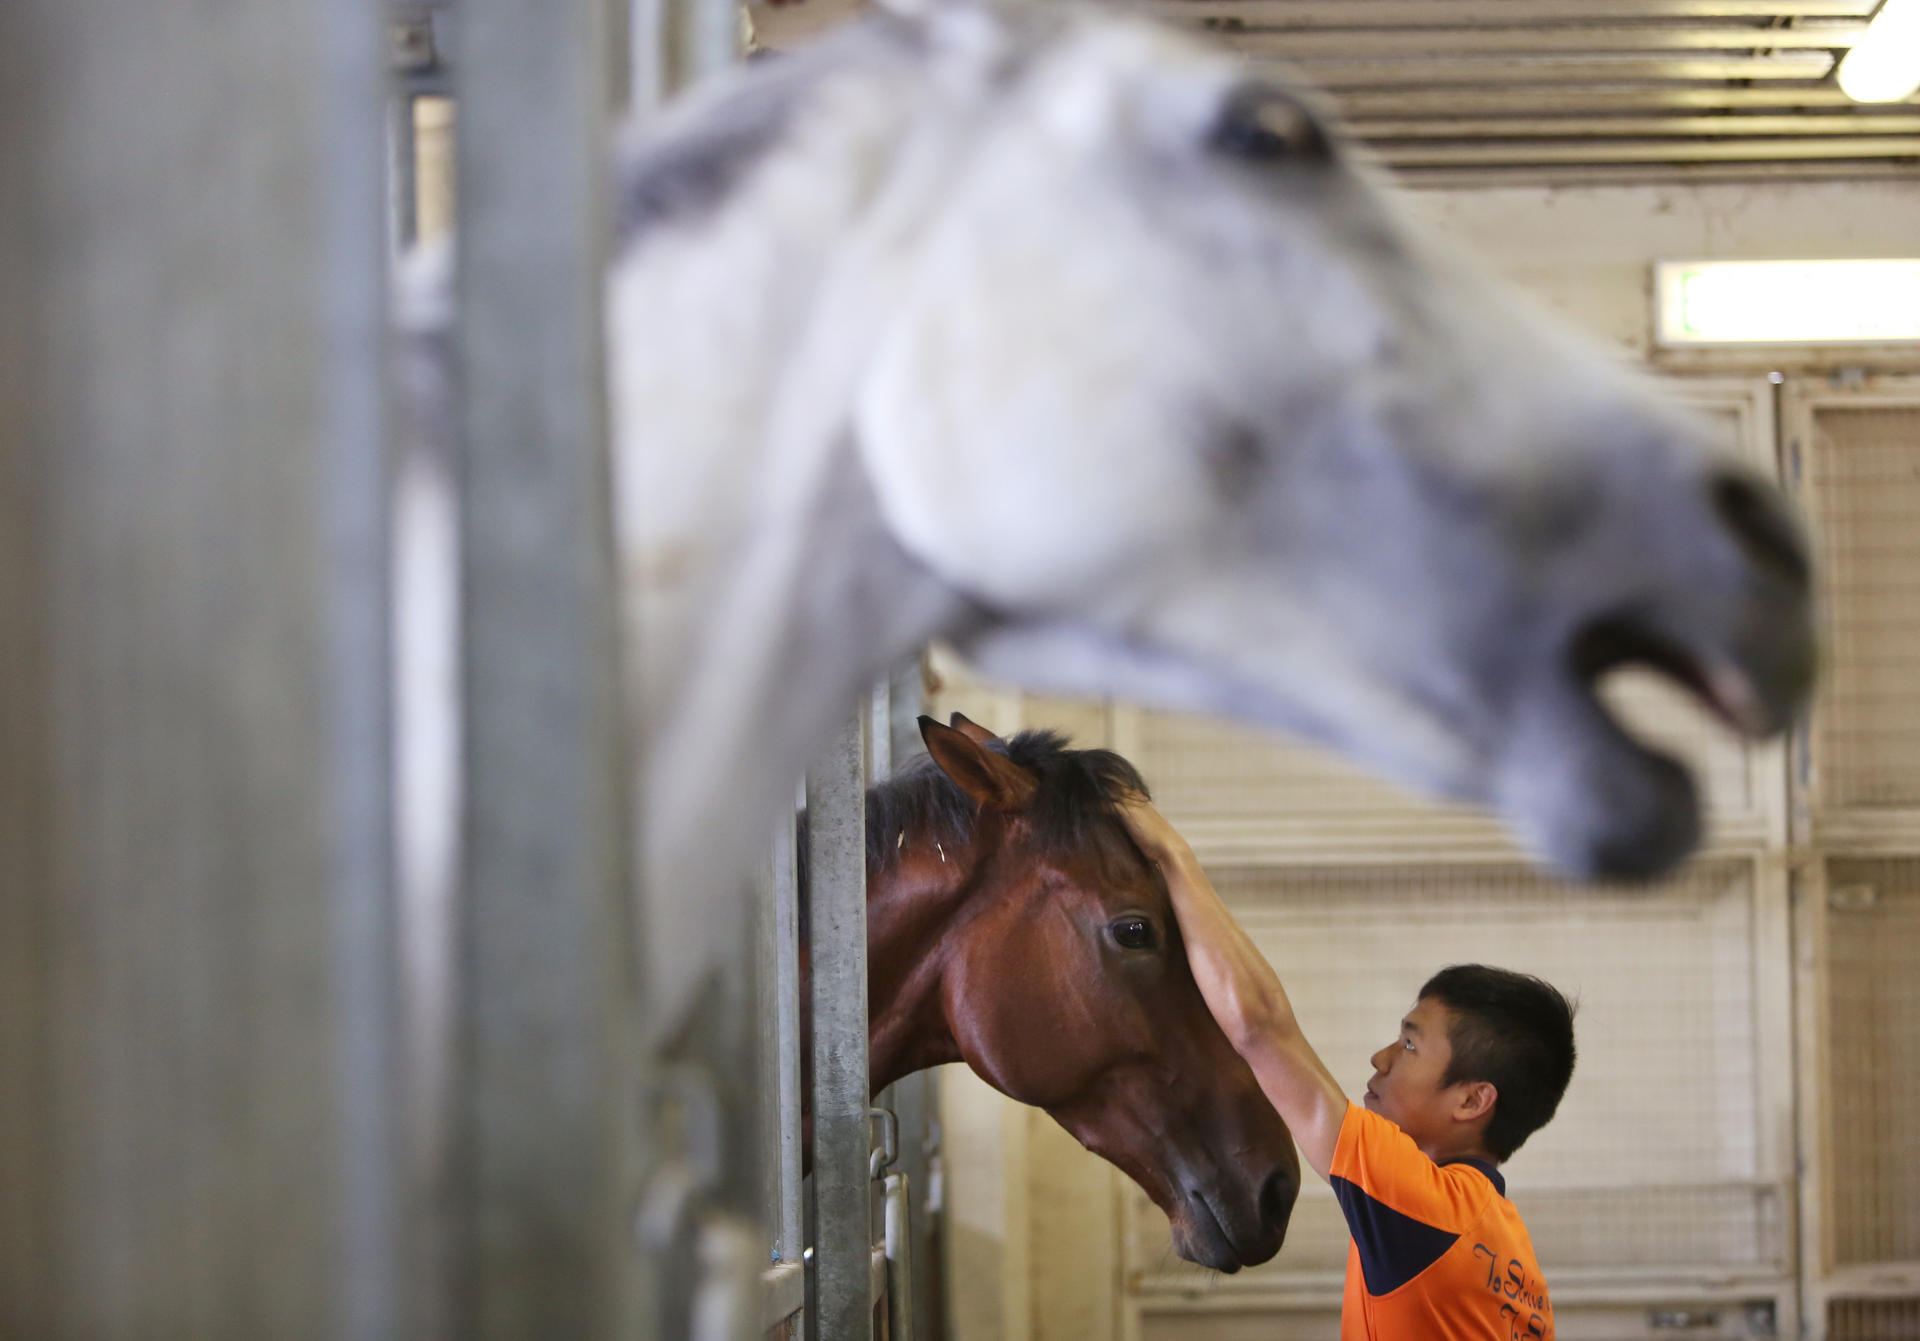 Trainee Chris Pang tends to one of the horses at the Jockey Club's talent development stable at the Sha Tin Racecourse. Photo: Sam Tsang